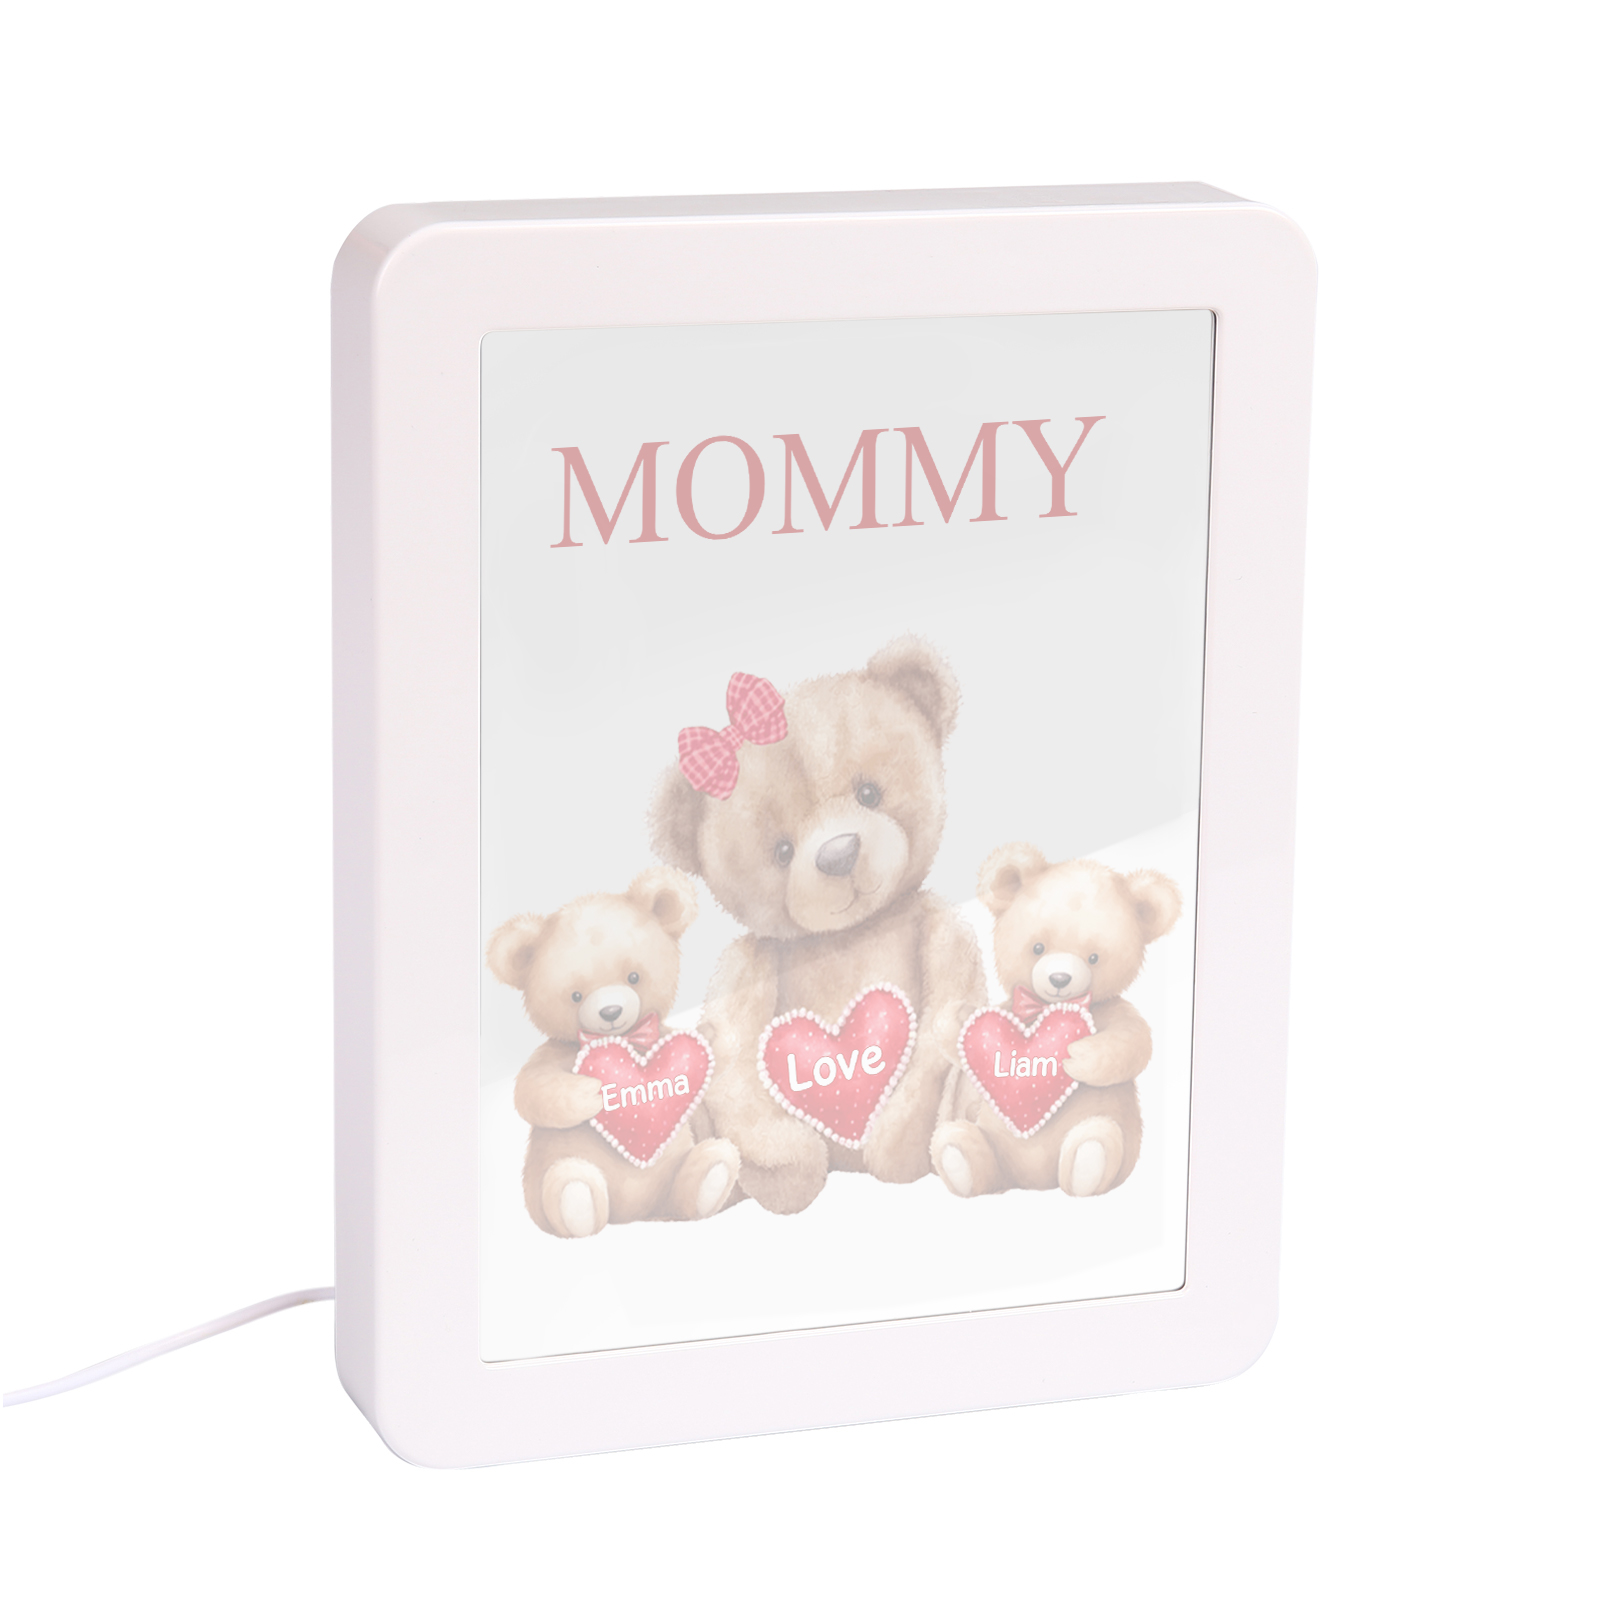 2 Names - Personalized Mum Home Bear Style Custom Text LED Night Light Gift for Mom